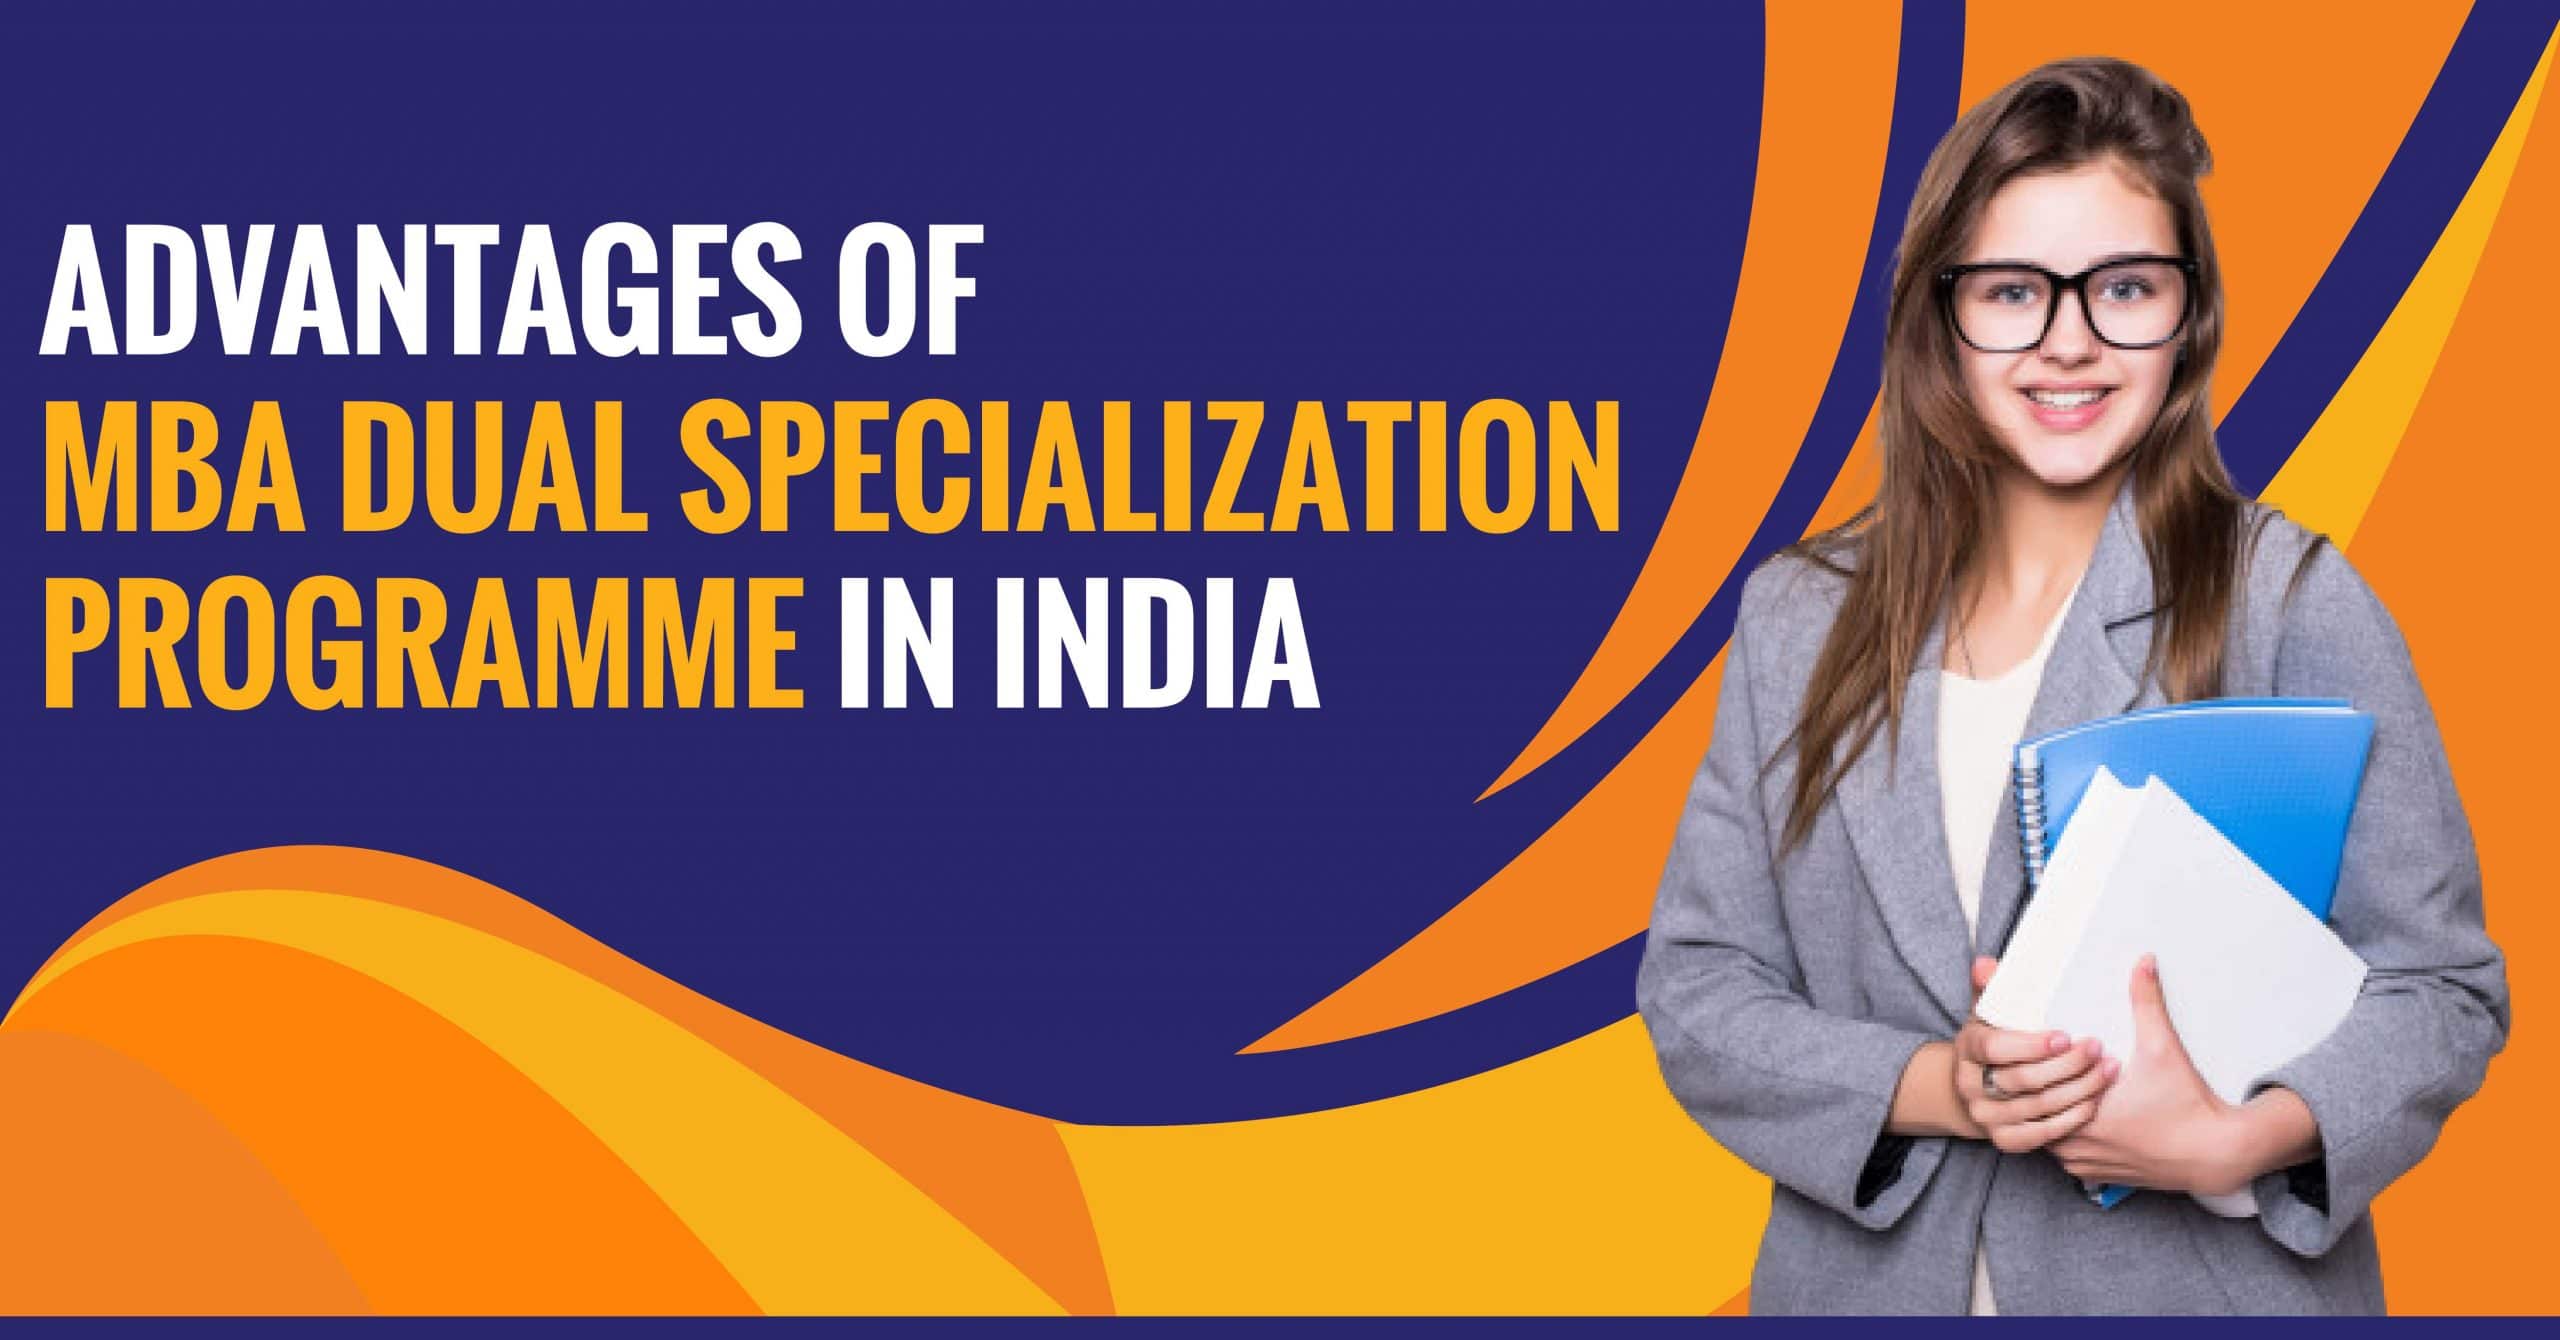 Advantages of MBA Dual Specialization Programme in India